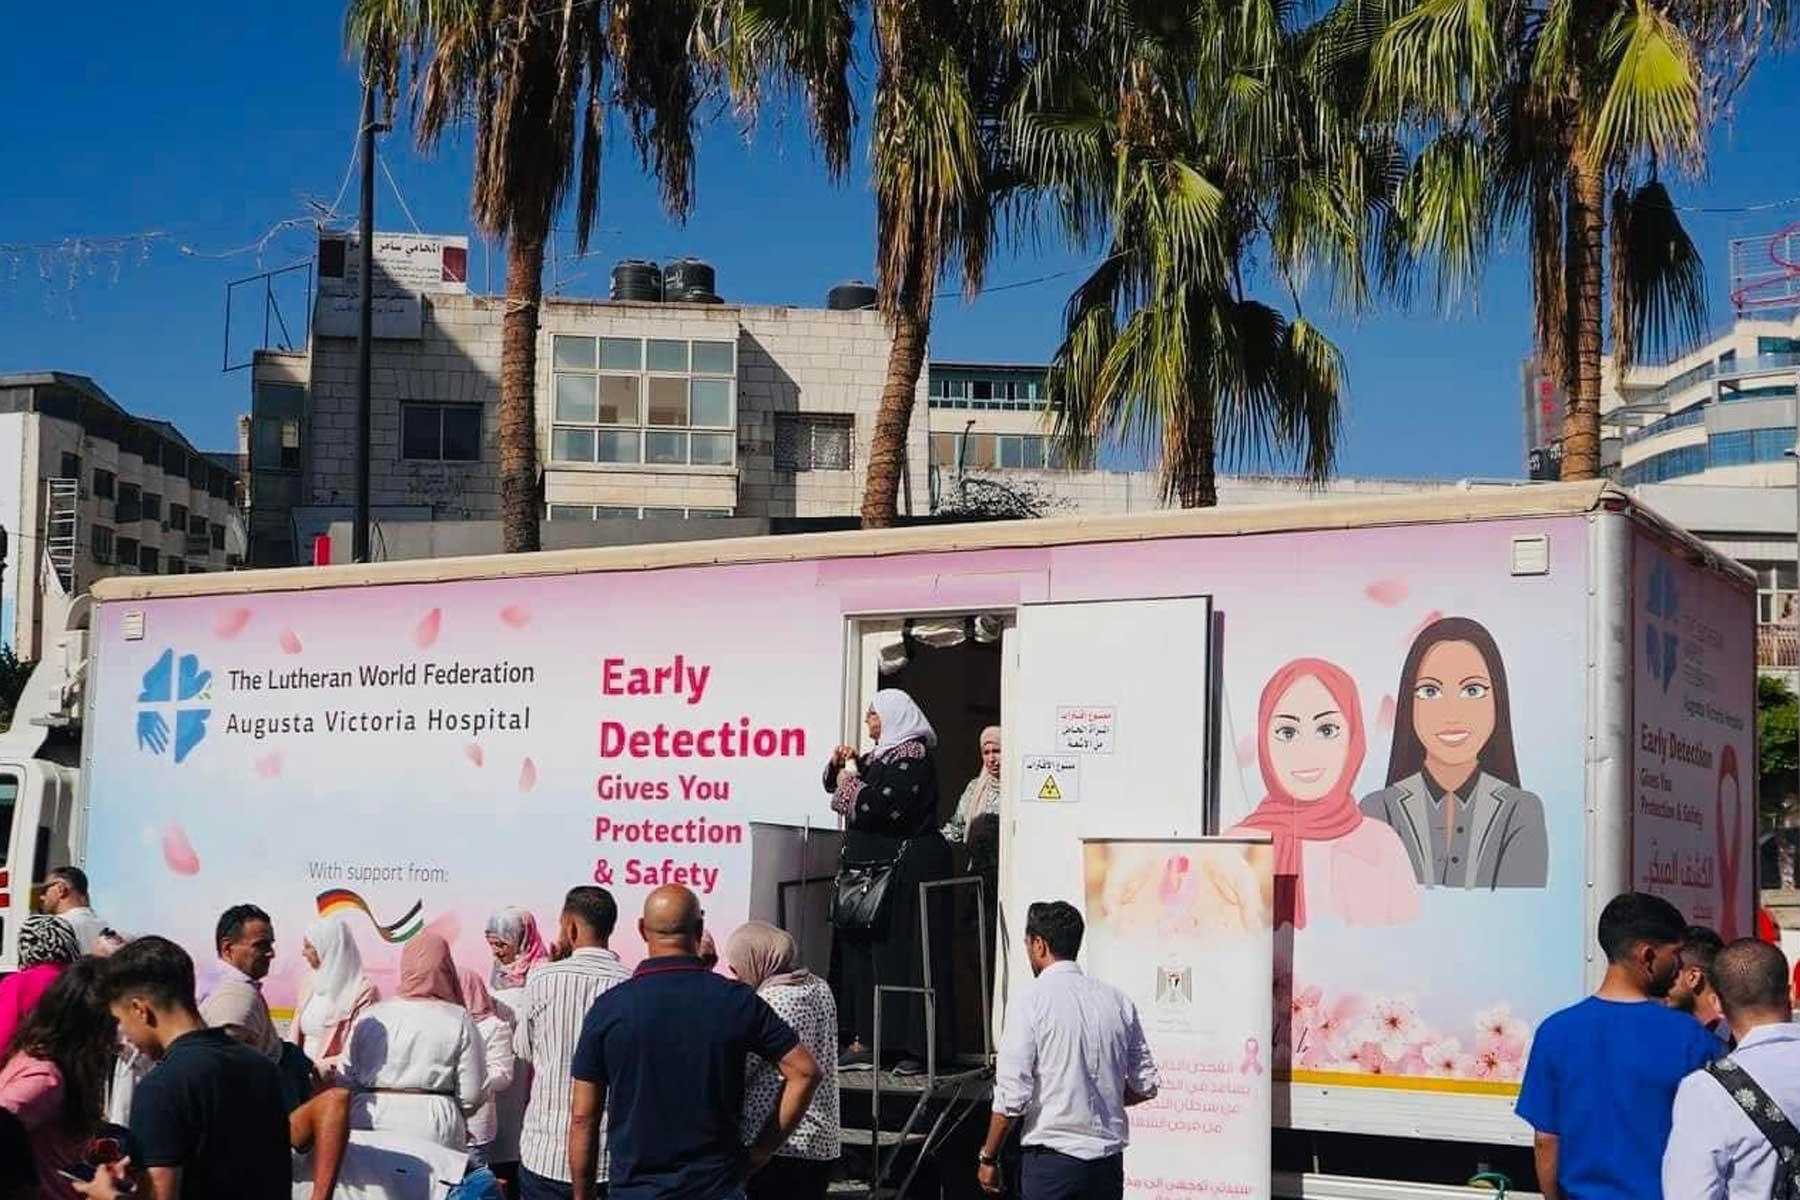 The mobile mammography screening unit, the “Pink Bus”, at Singel village in Ramallah on 3rd October 2022. The bus offers free screenings to women in Palestine and the West Bank. Photo: AVH